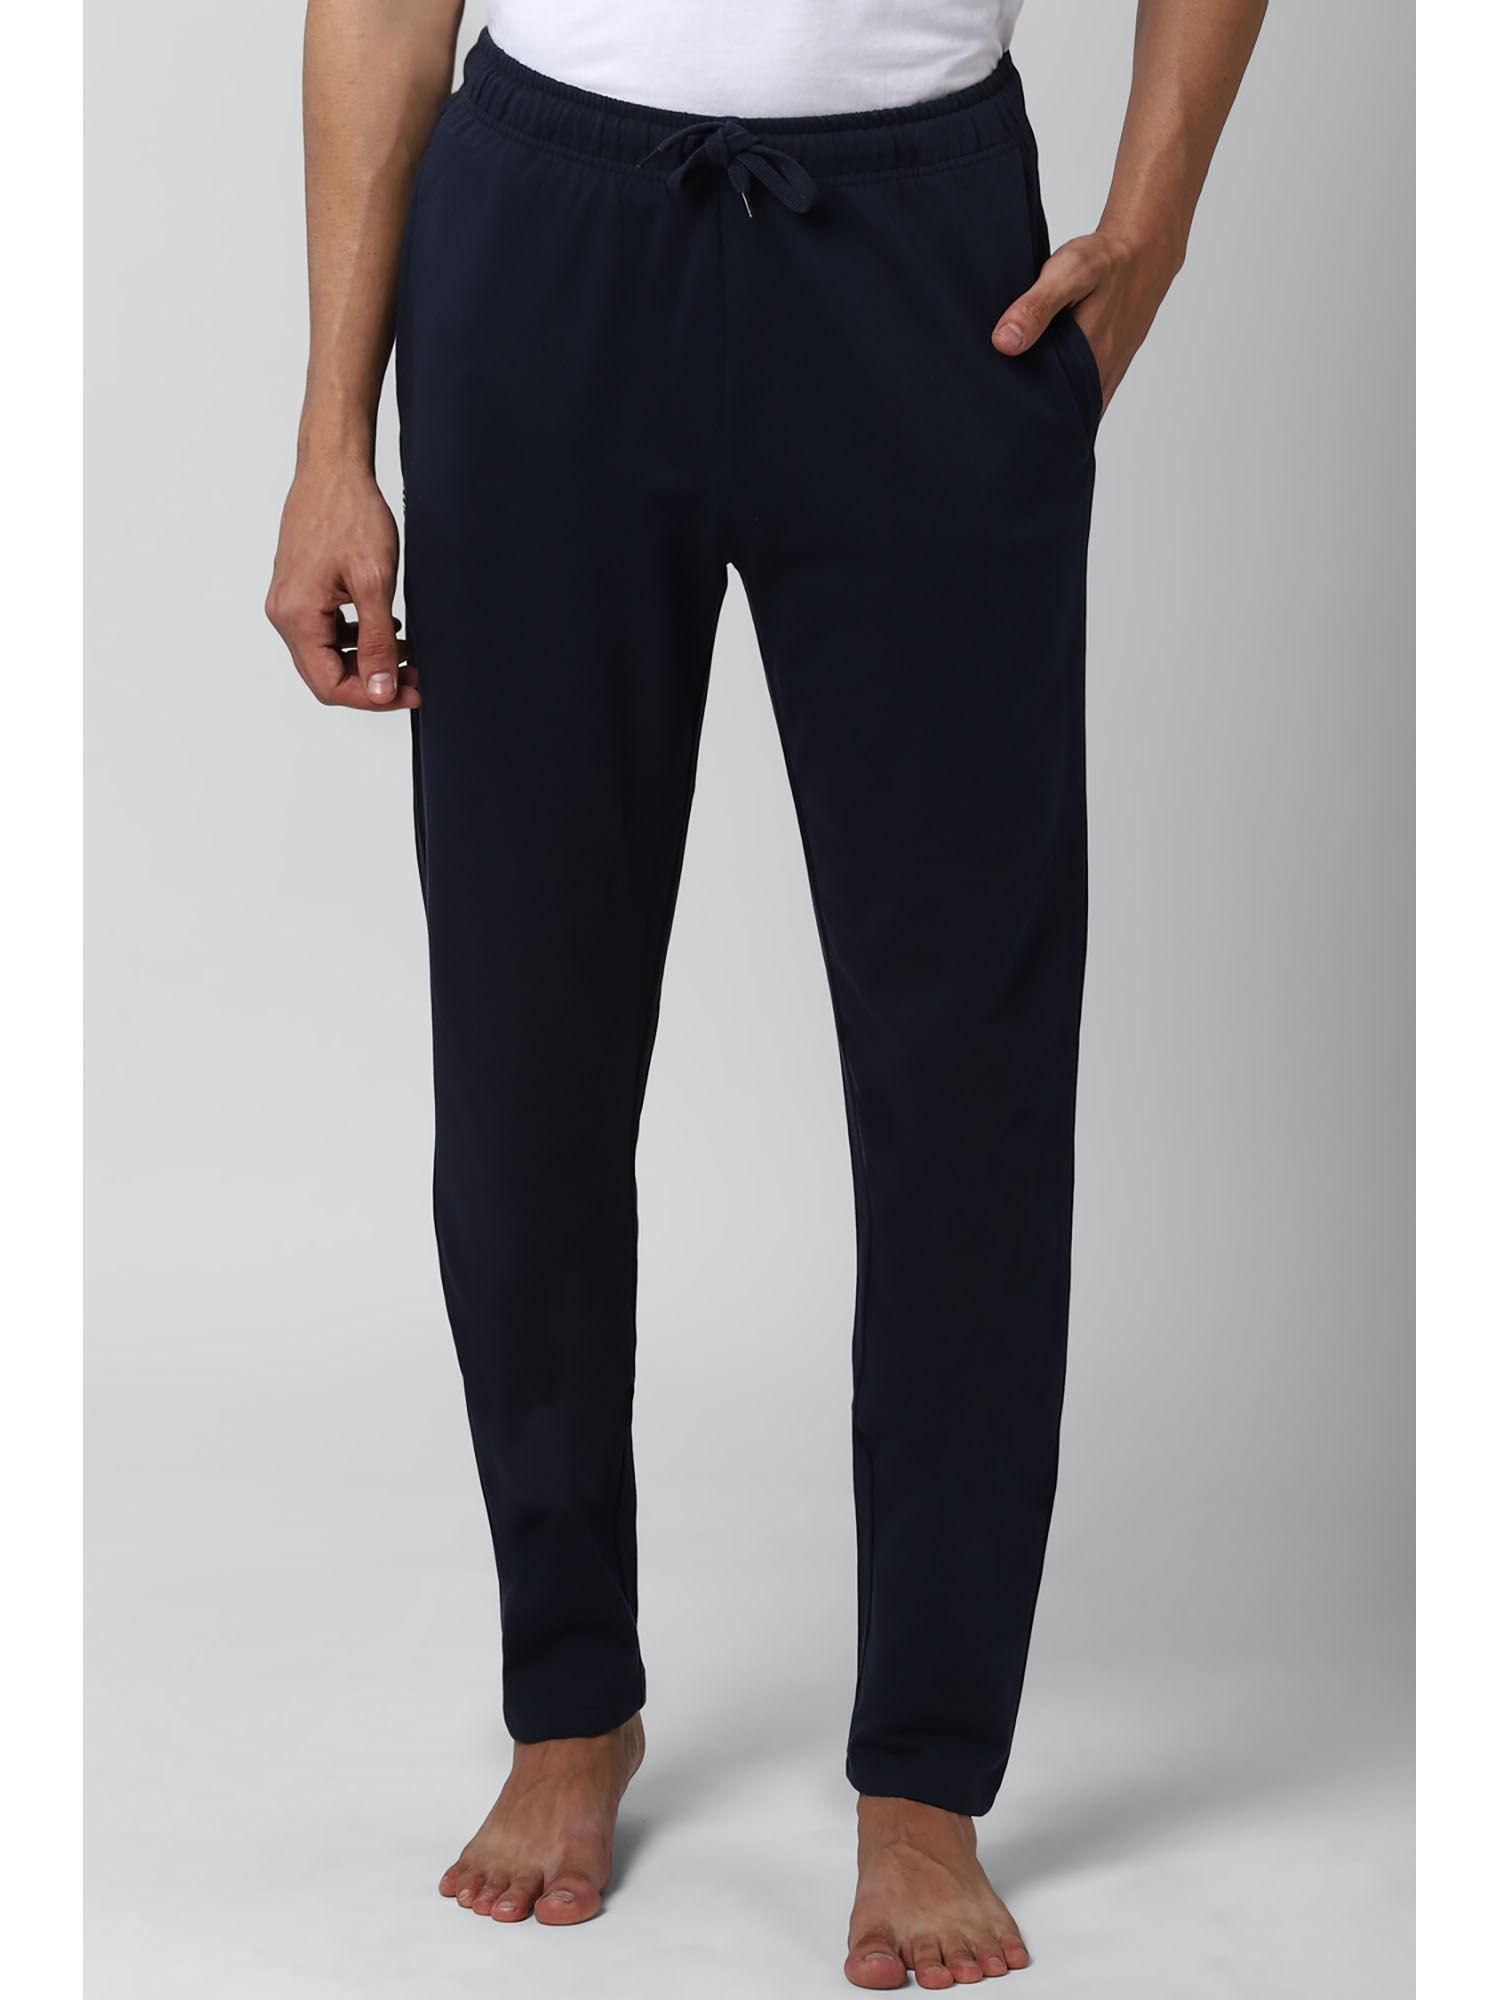 navy-track-pant